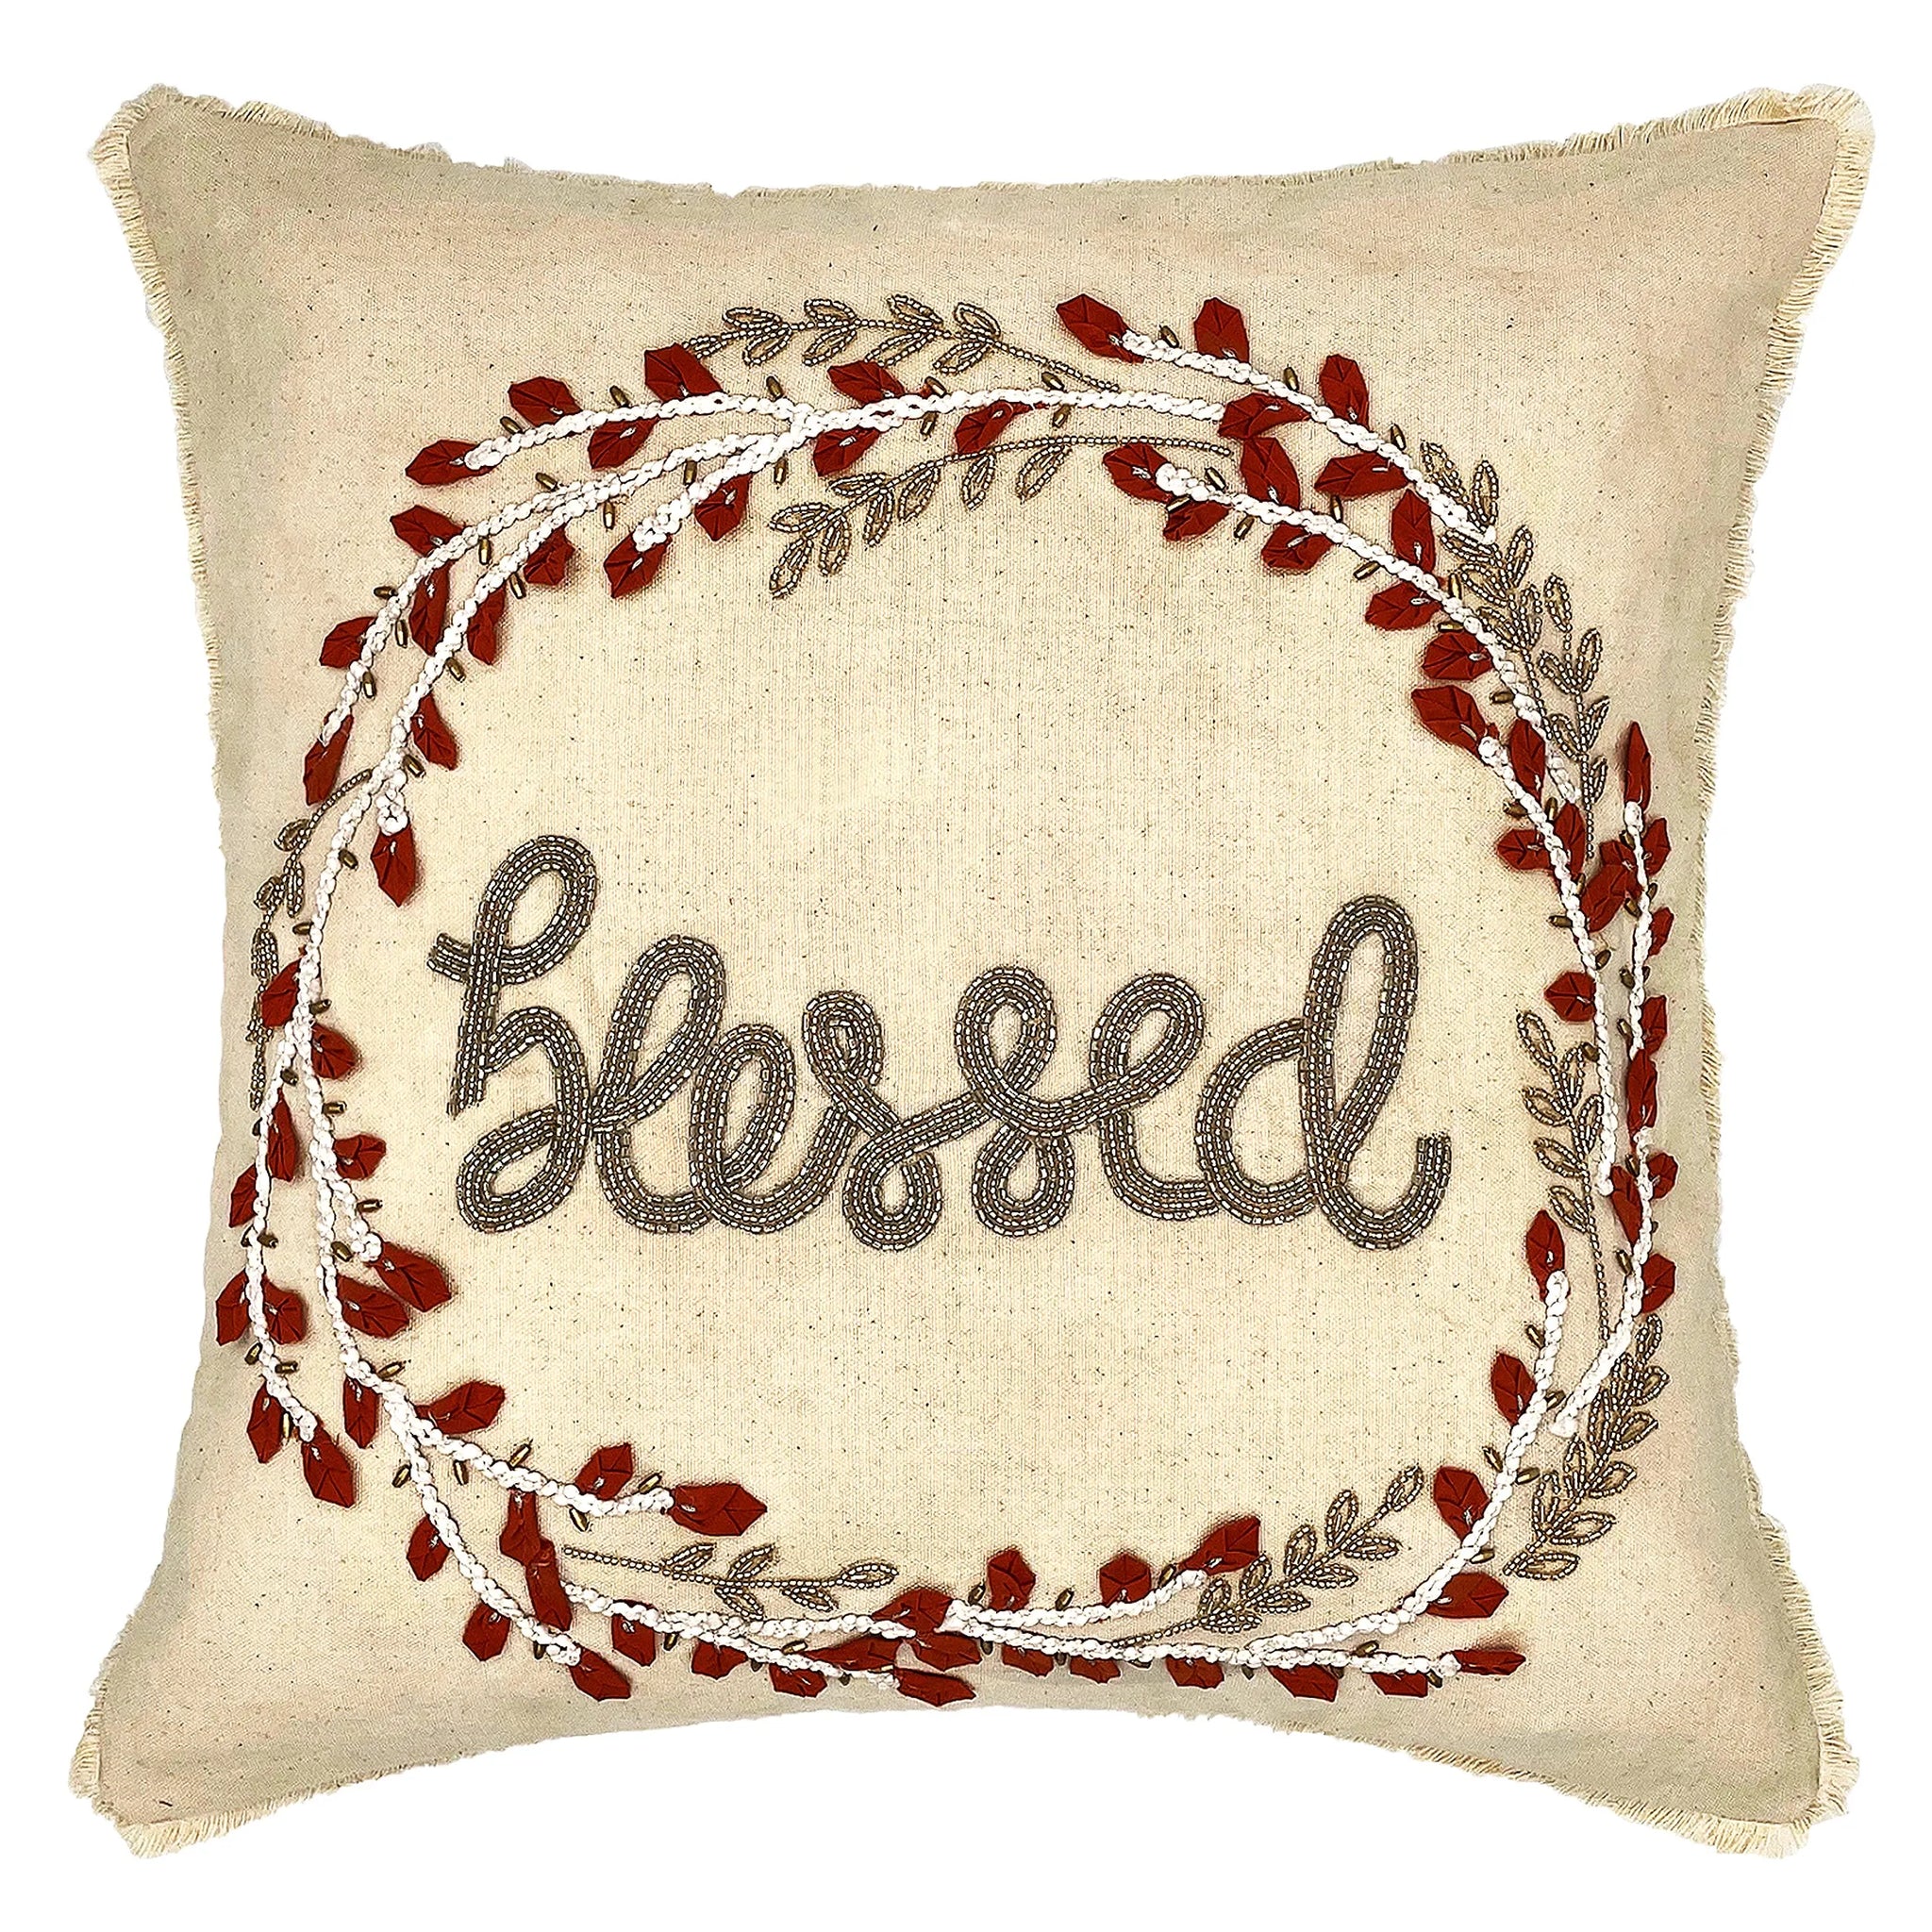 18" Blessed Wreath Embroidery Pillow home decor - Mod Lifestyles